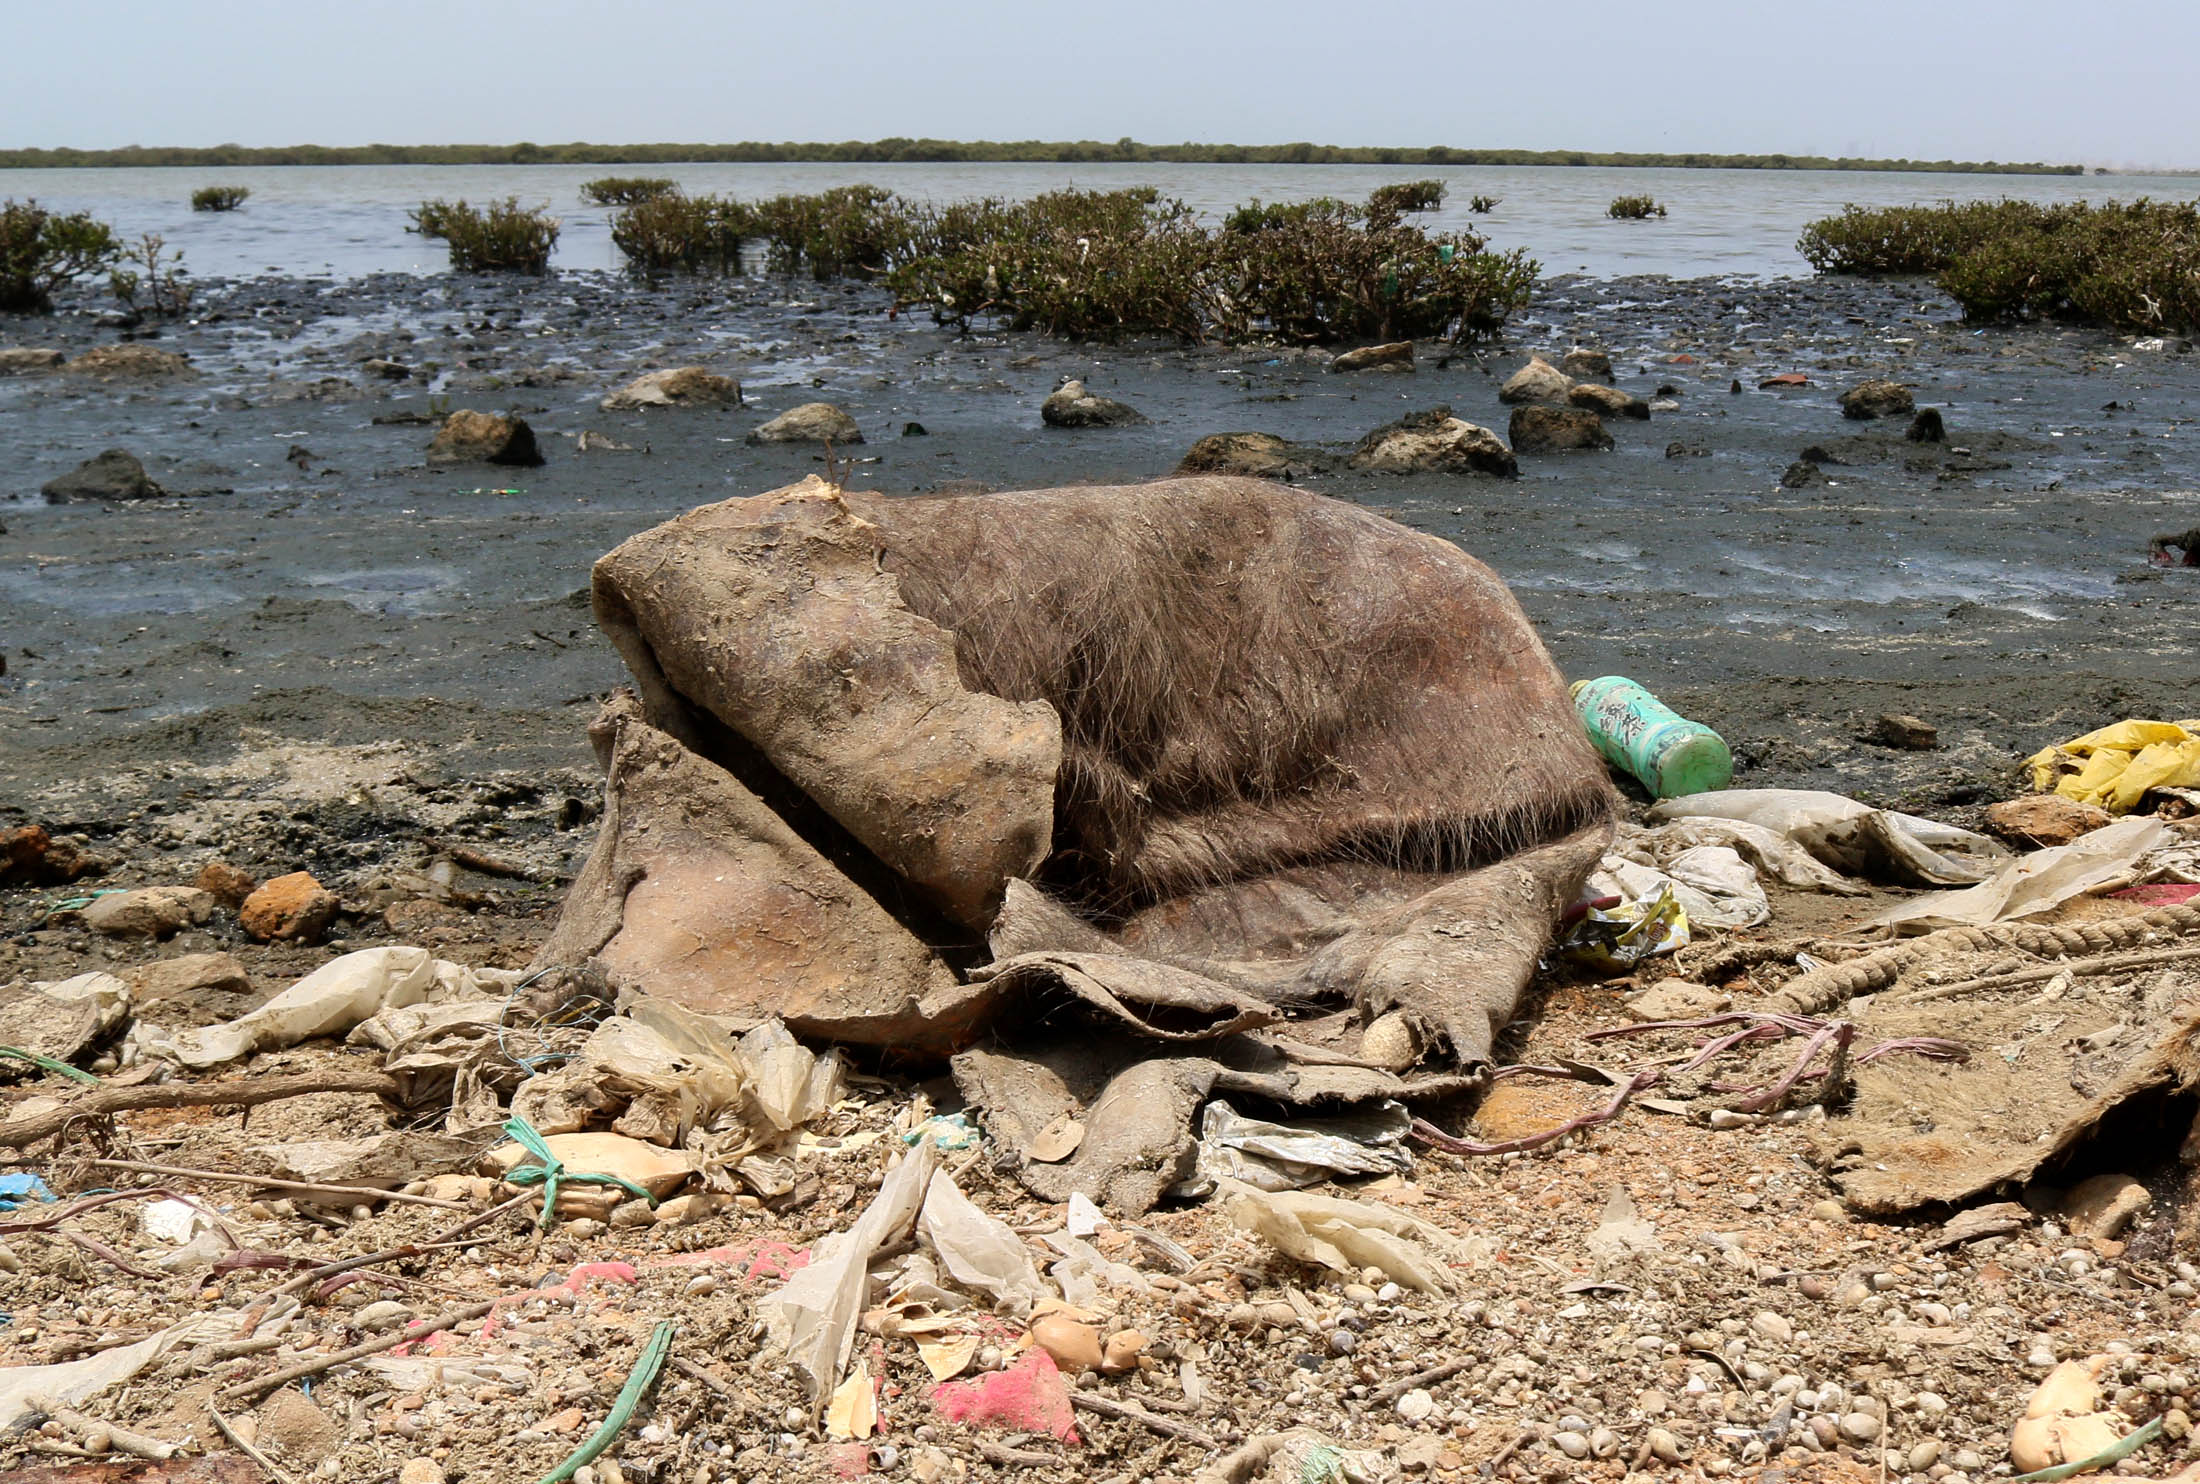 <p>Residents of Chashma Goth in Karachi face litter, uncollected garbage and foul odours from untreated wastewater (Image: Ali Ousat)</p>